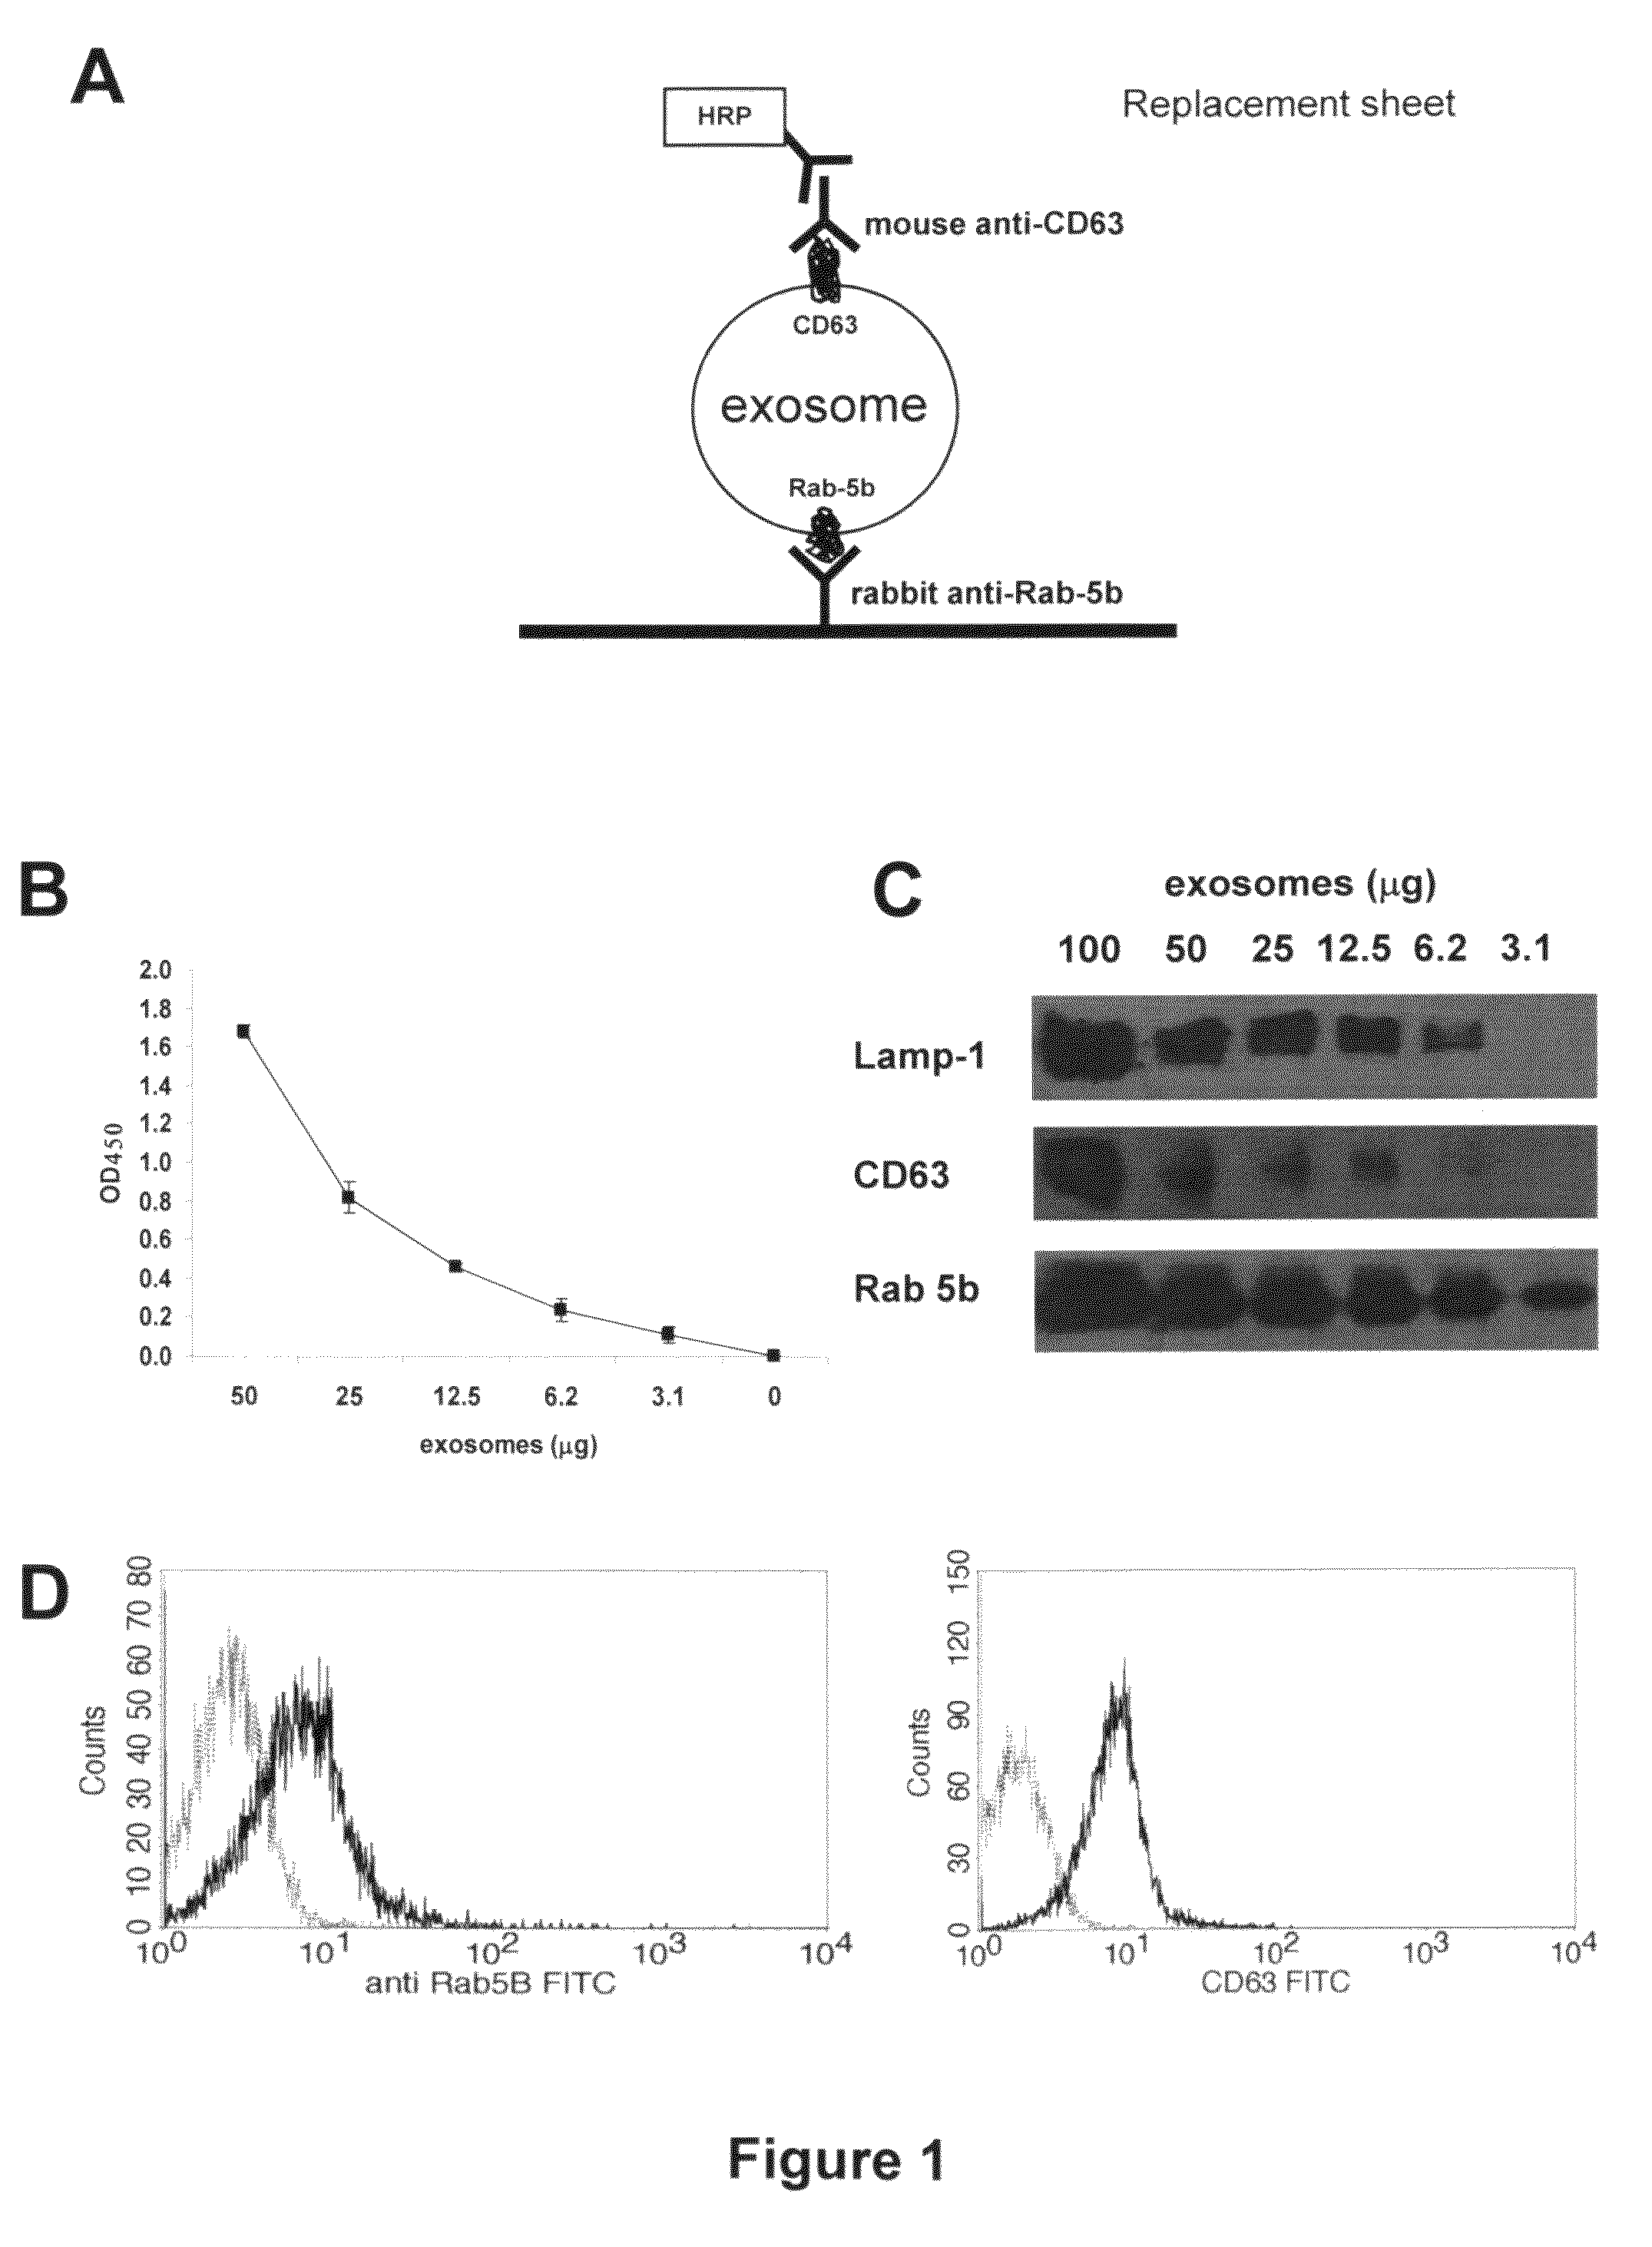 Method to measure and characterize microvesicles in the human body fluids